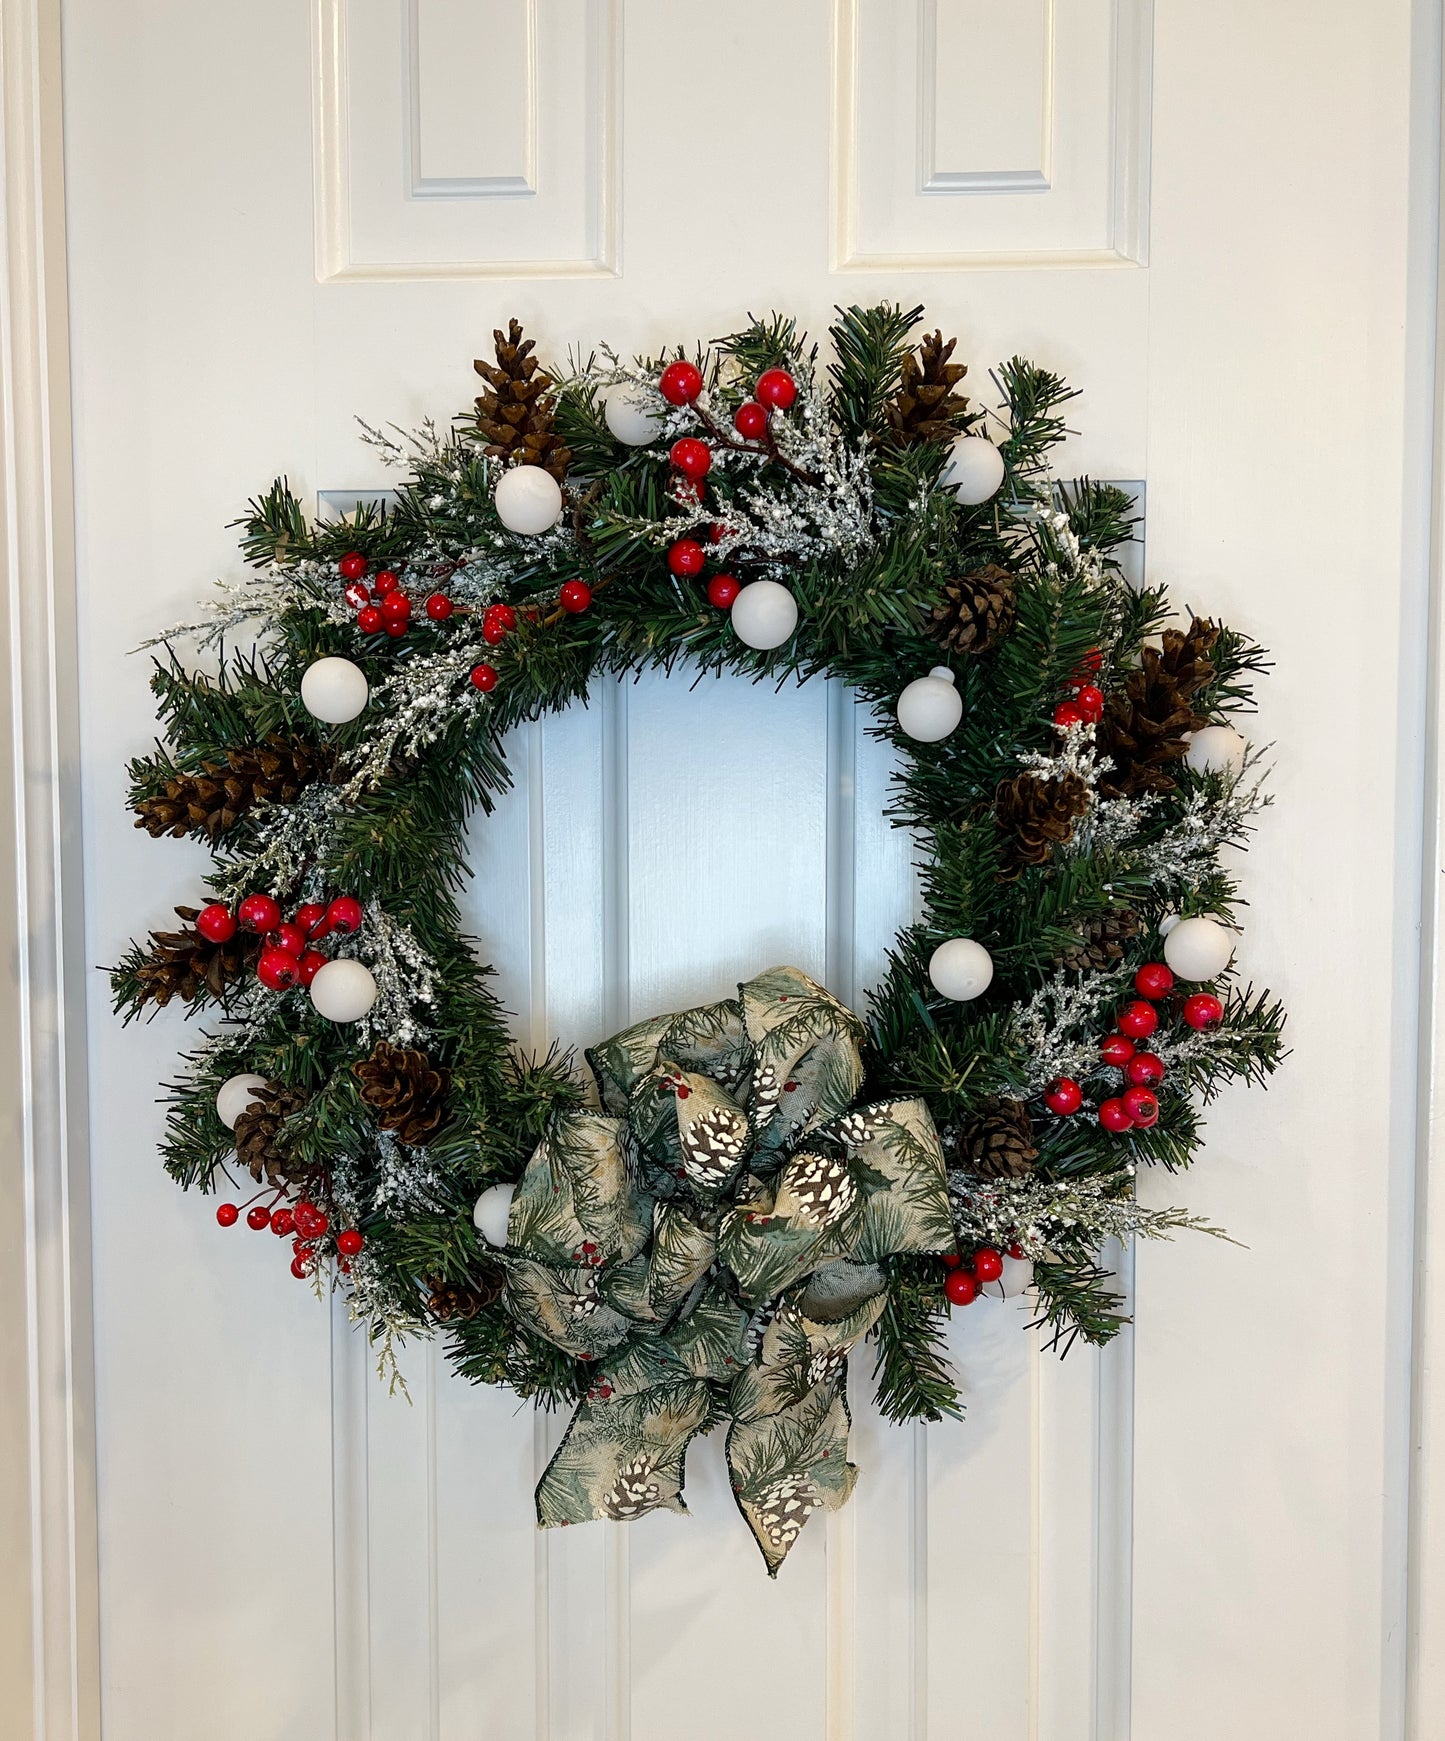 16" Holiday Wreath with Pinecones & Berries